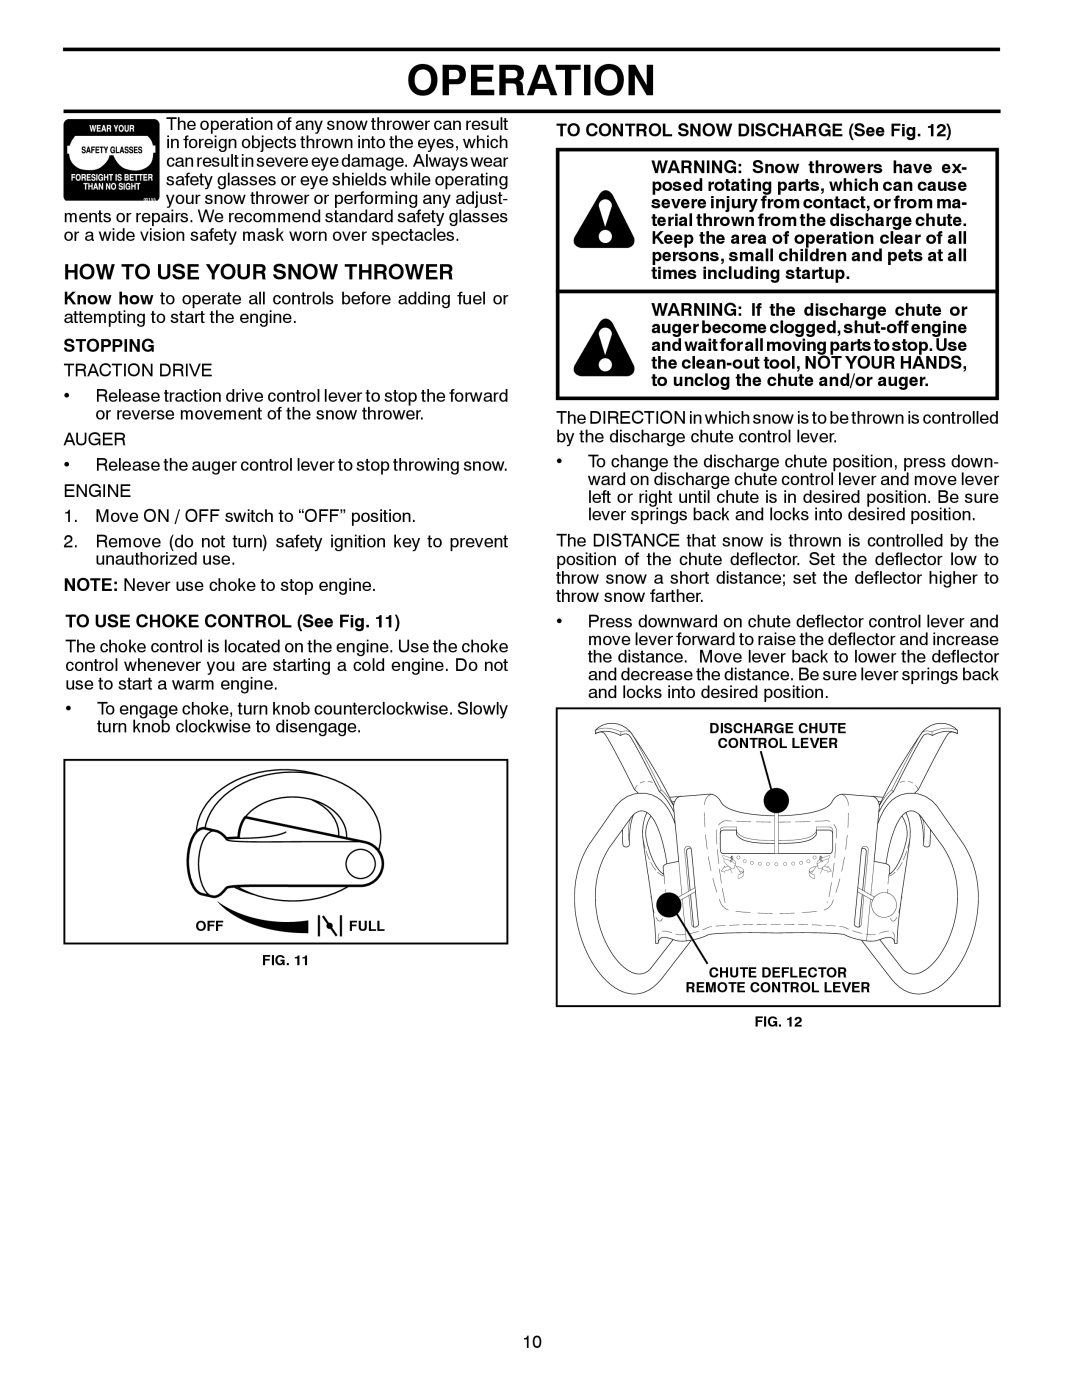 Poulan PR827ES owner manual How To Use Your Snow Thrower, Operation, Stopping, TO USE CHOKE CONTROL See Fig 